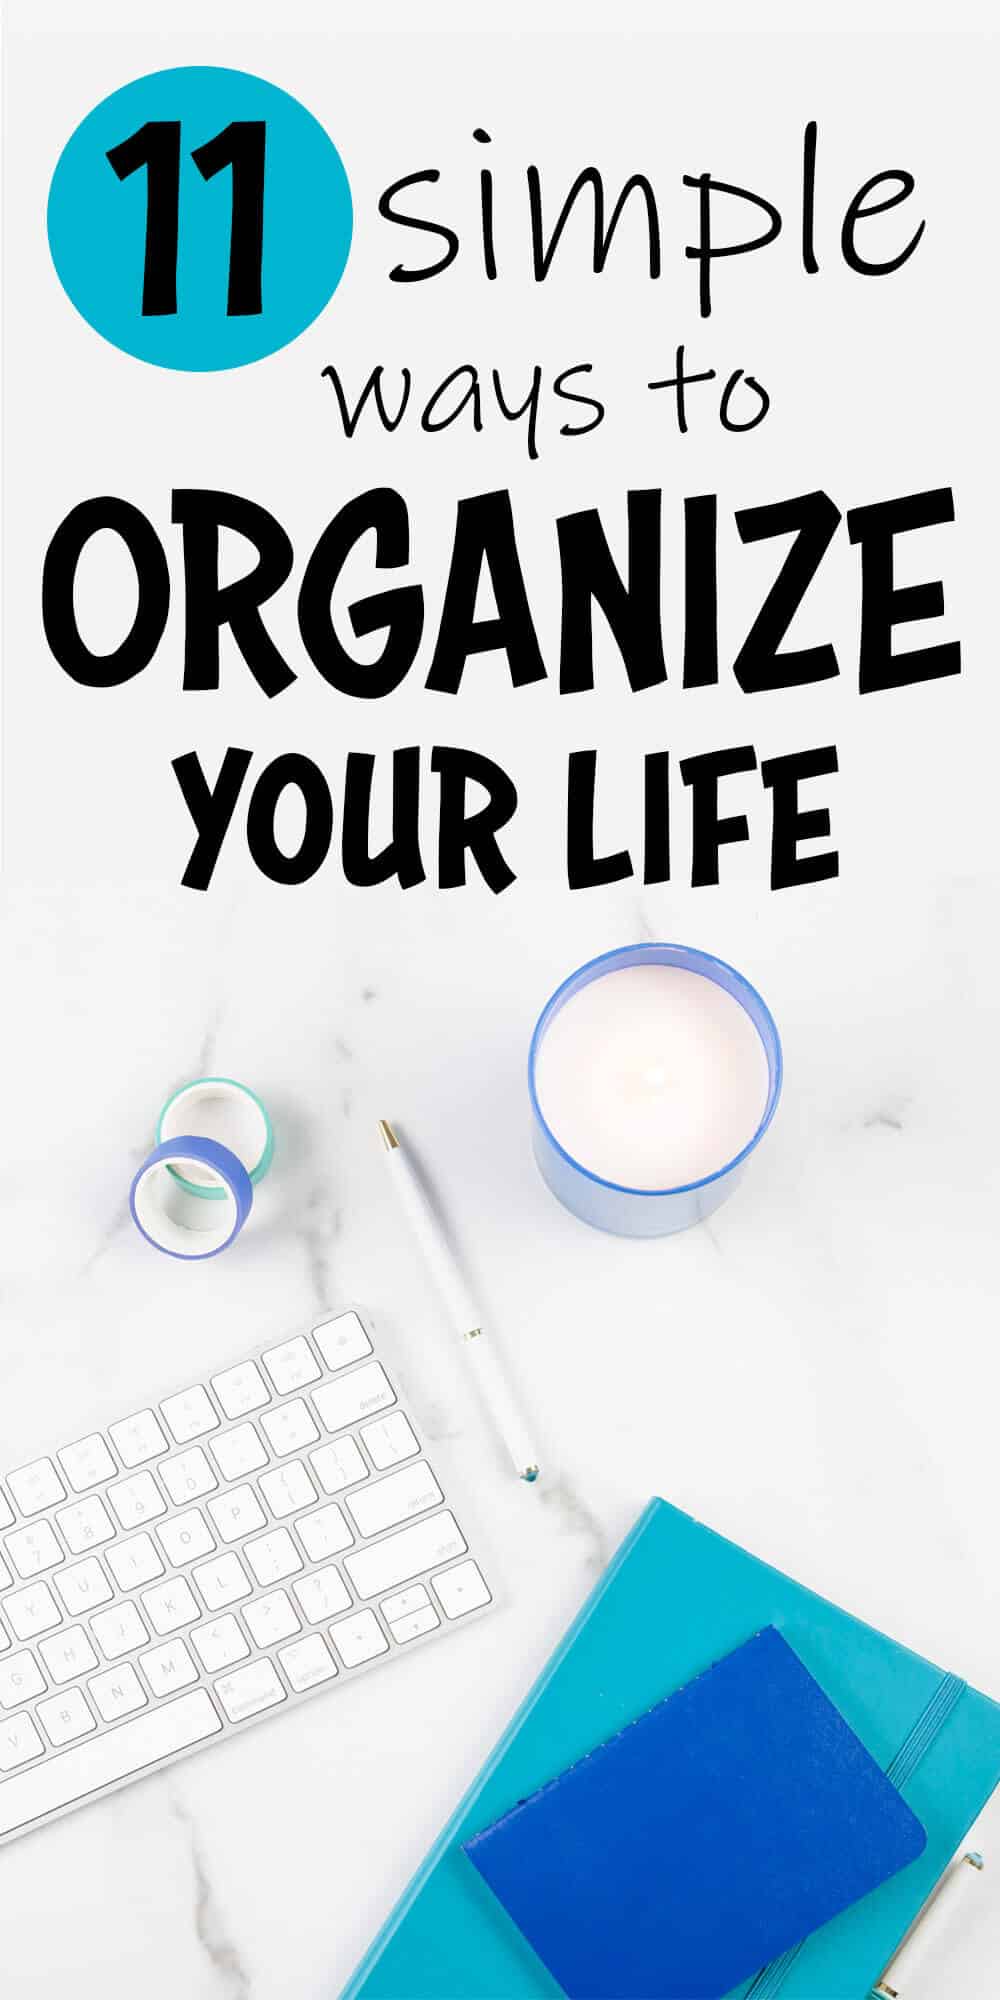 11 Simple Ways to Organize Your Life this Year - The Maximizing Momma